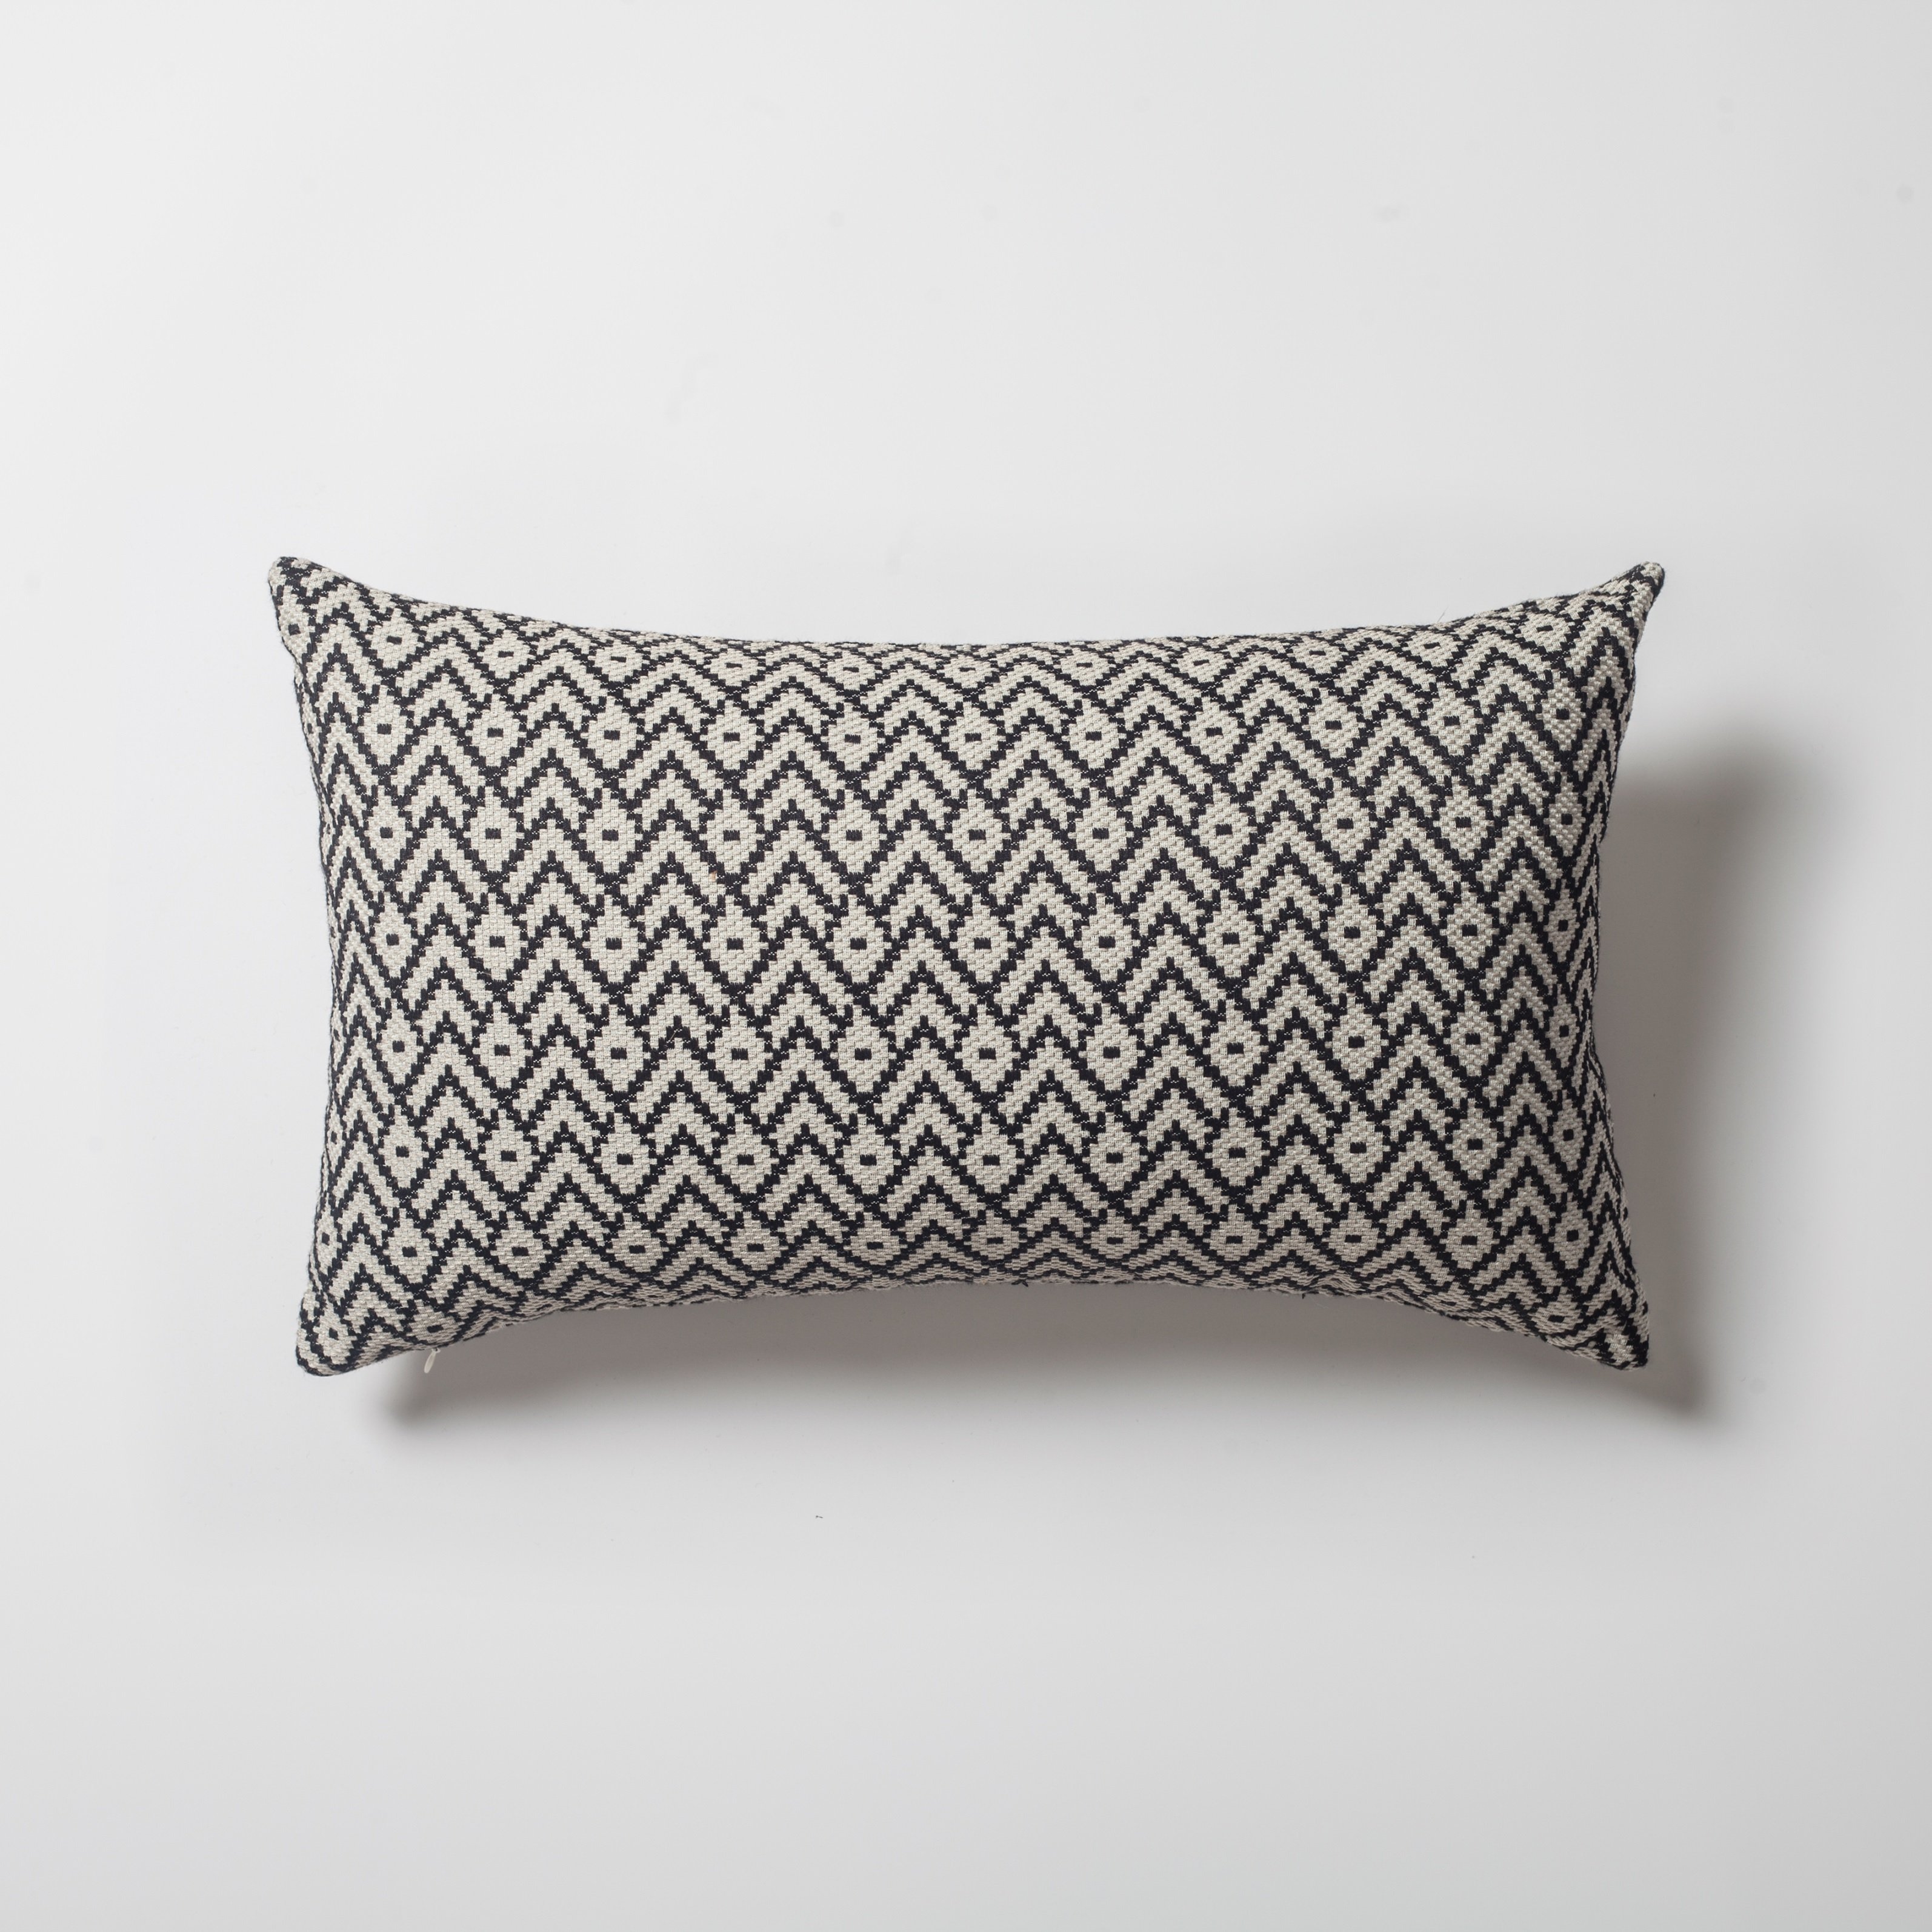 "Gusto" - Linen Modern Small Patterned Linen Pillow 12x20 Inch - Black (Cover Only)